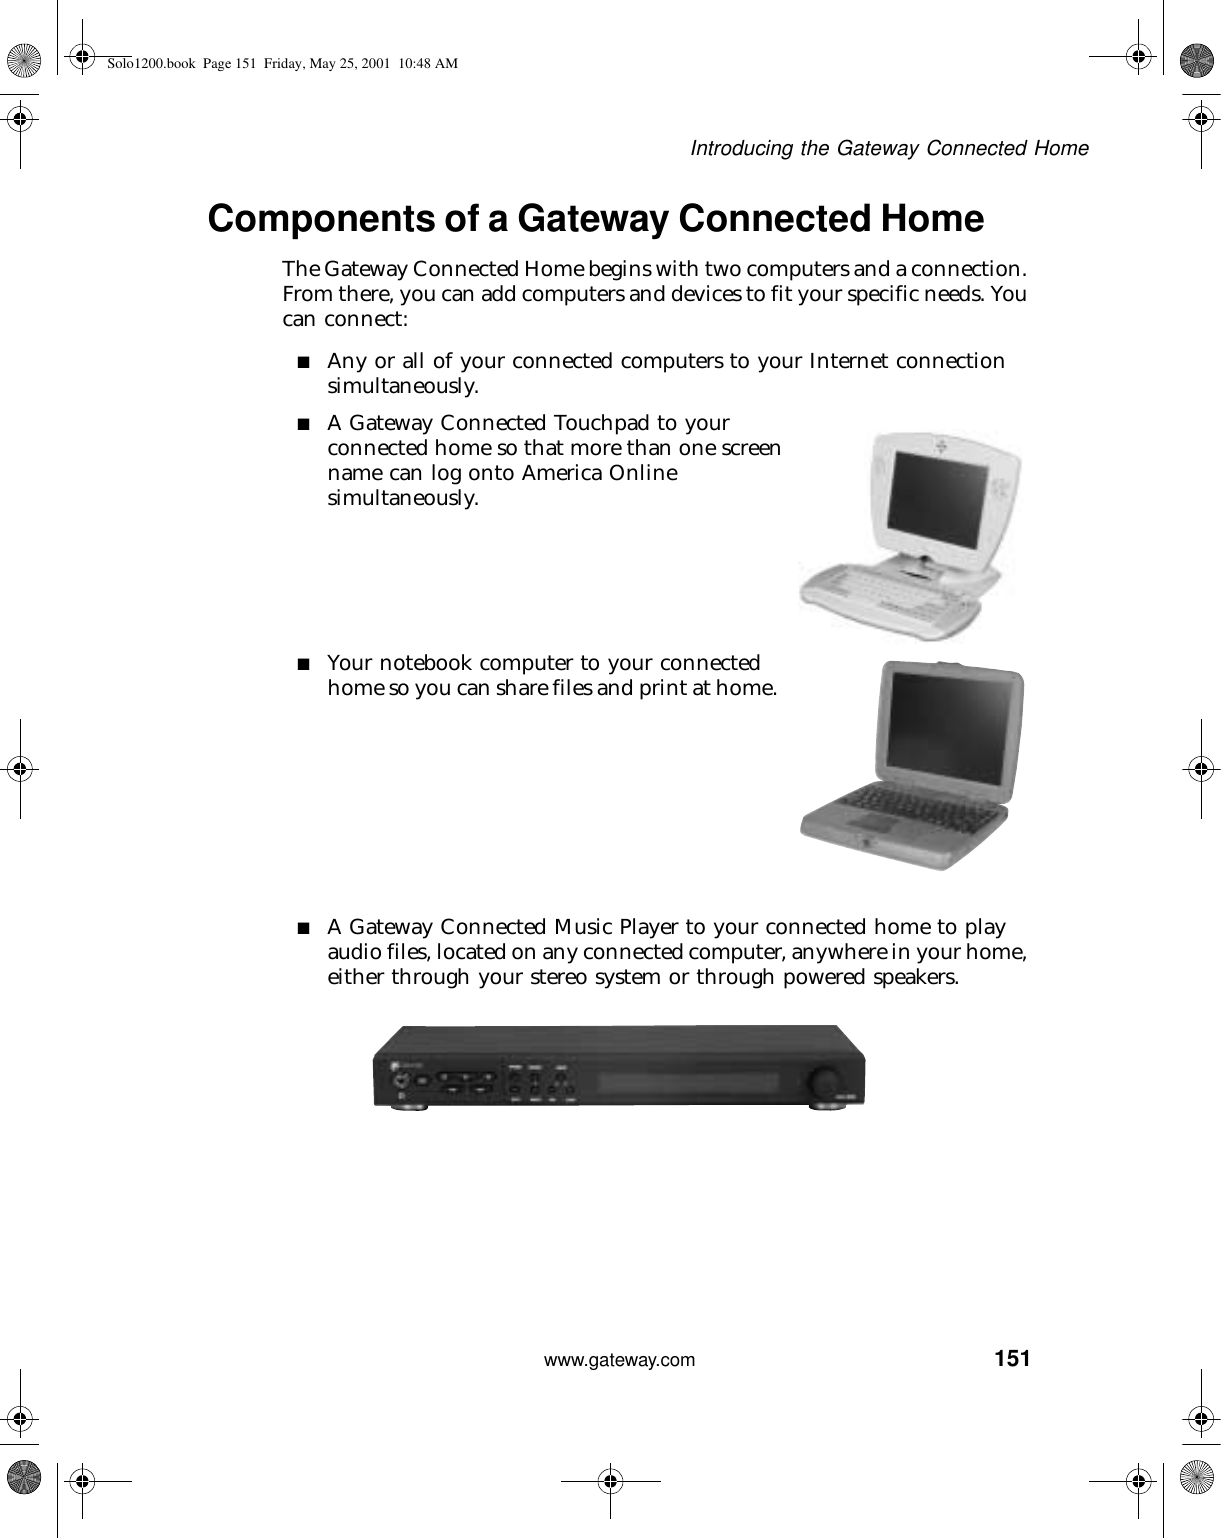 151Introducing the Gateway Connected Homewww.gateway.comComponents of a Gateway Connected HomeThe Gateway Connected Home begins with two computers and a connection. From there, you can add computers and devices to fit your specific needs. You can connect:■Any or all of your connected computers to your Internet connection simultaneously.■A Gateway Connected Touchpad to your connected home so that more than one screen name can log onto America Online simultaneously.■Your notebook computer to your connected home so you can share files and print at home.■A Gateway Connected Music Player to your connected home to play audio files, located on any connected computer, anywhere in your home, either through your stereo system or through powered speakers.Solo1200.book Page 151 Friday, May 25, 2001 10:48 AM